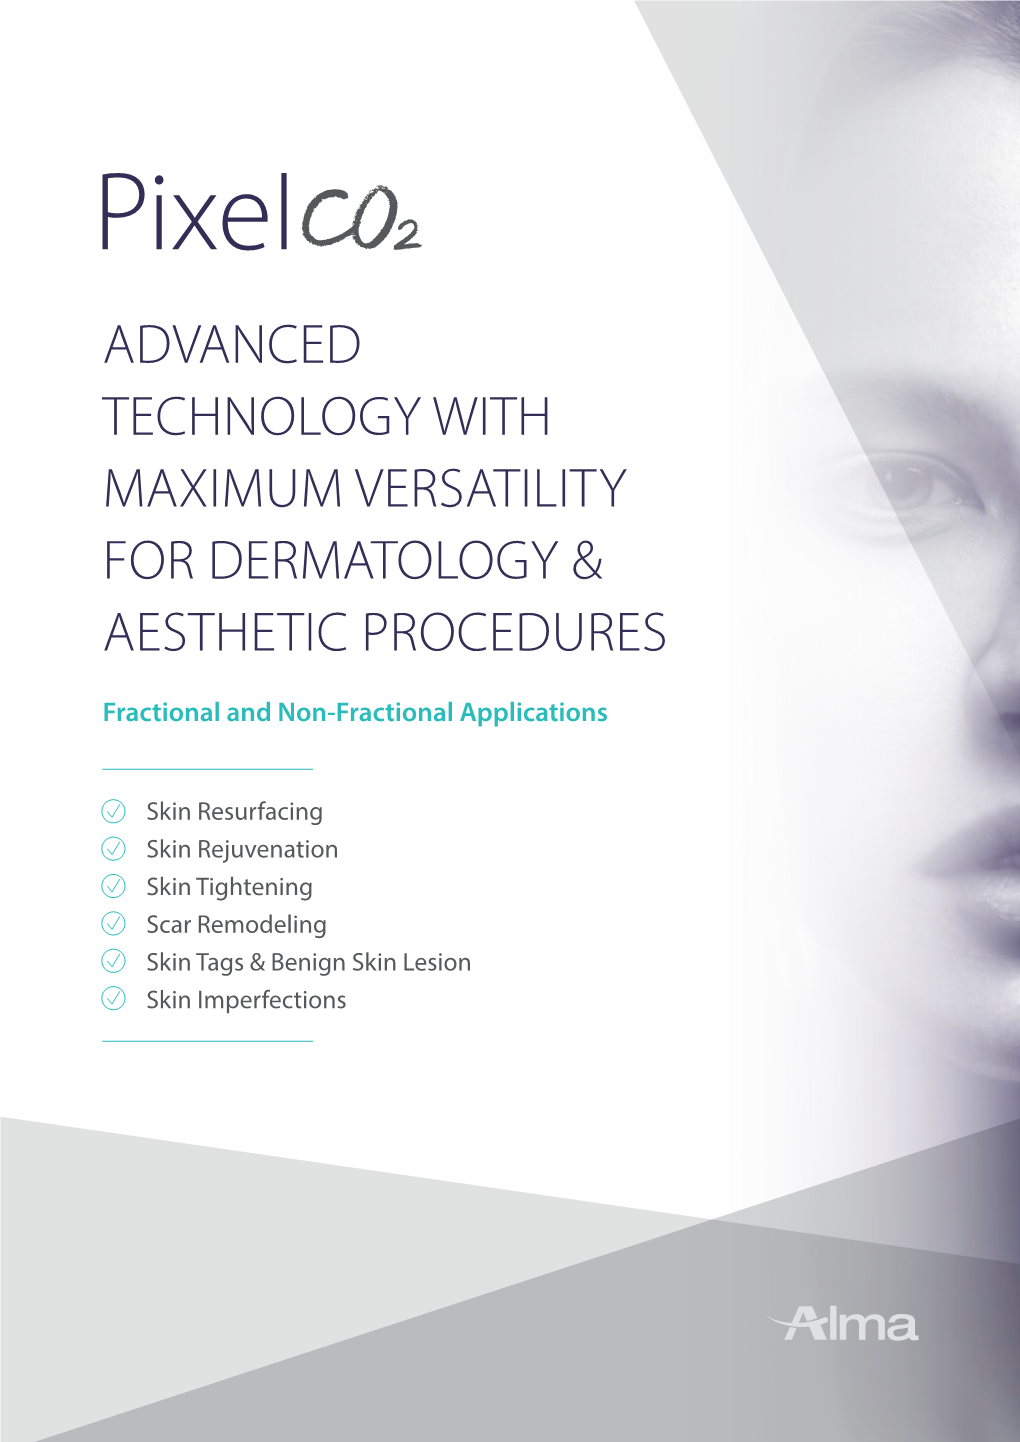 Advanced Technology with Maximum Versatility for Dermatology & Aesthetic Procedures